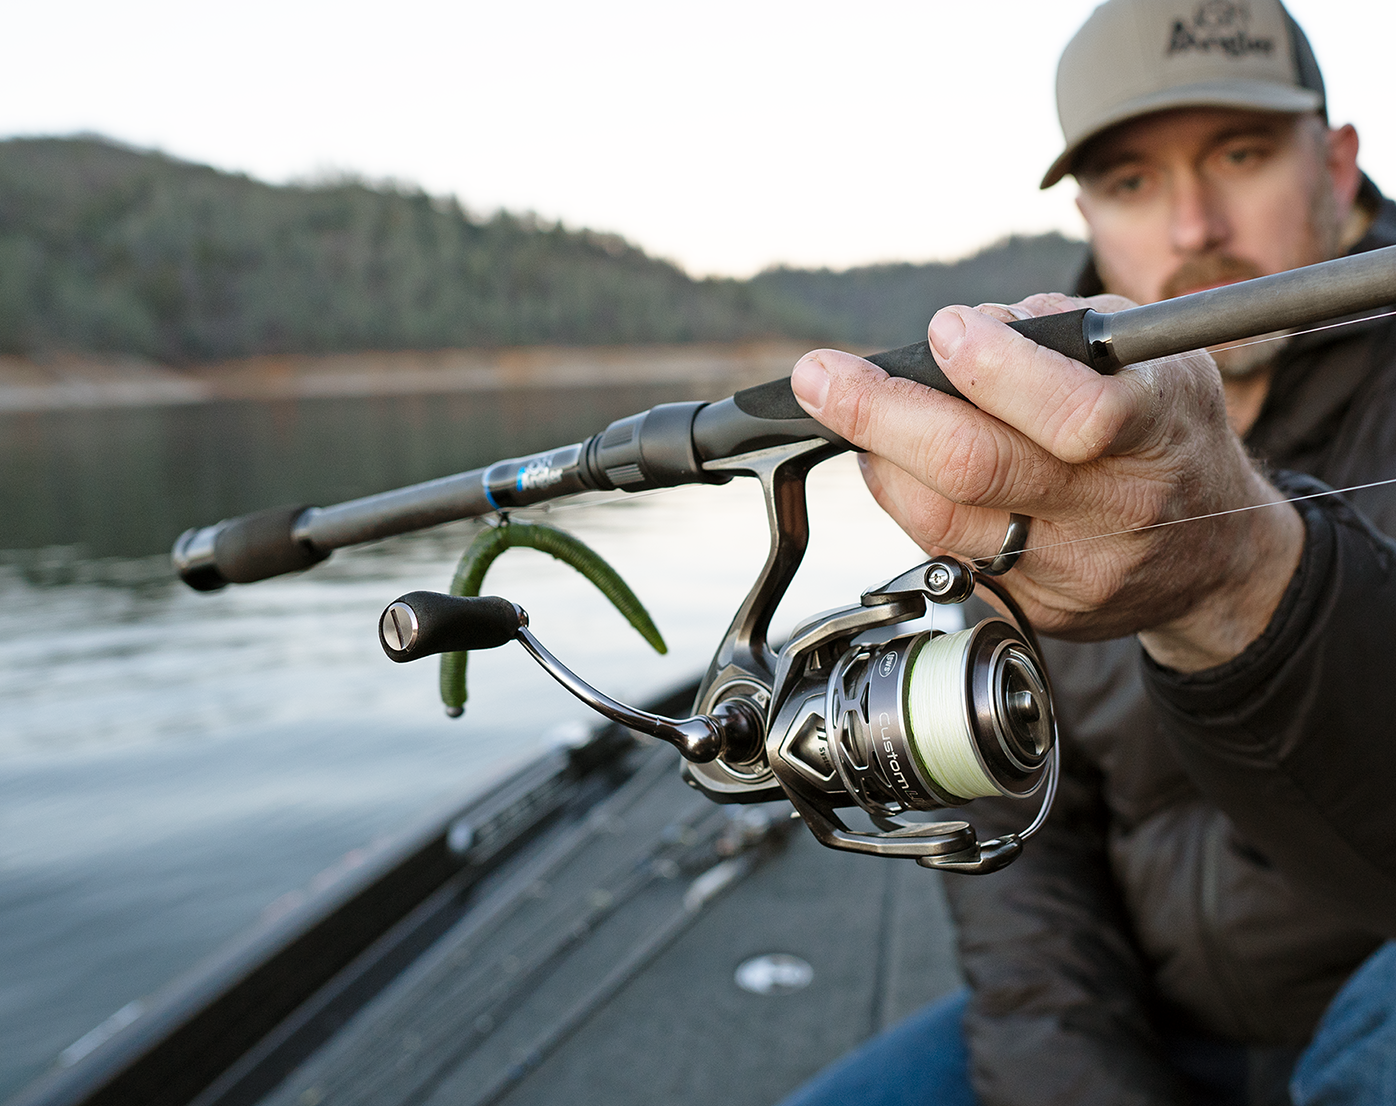 Shop the Best Fishing Tools and Accessories for Every Angler